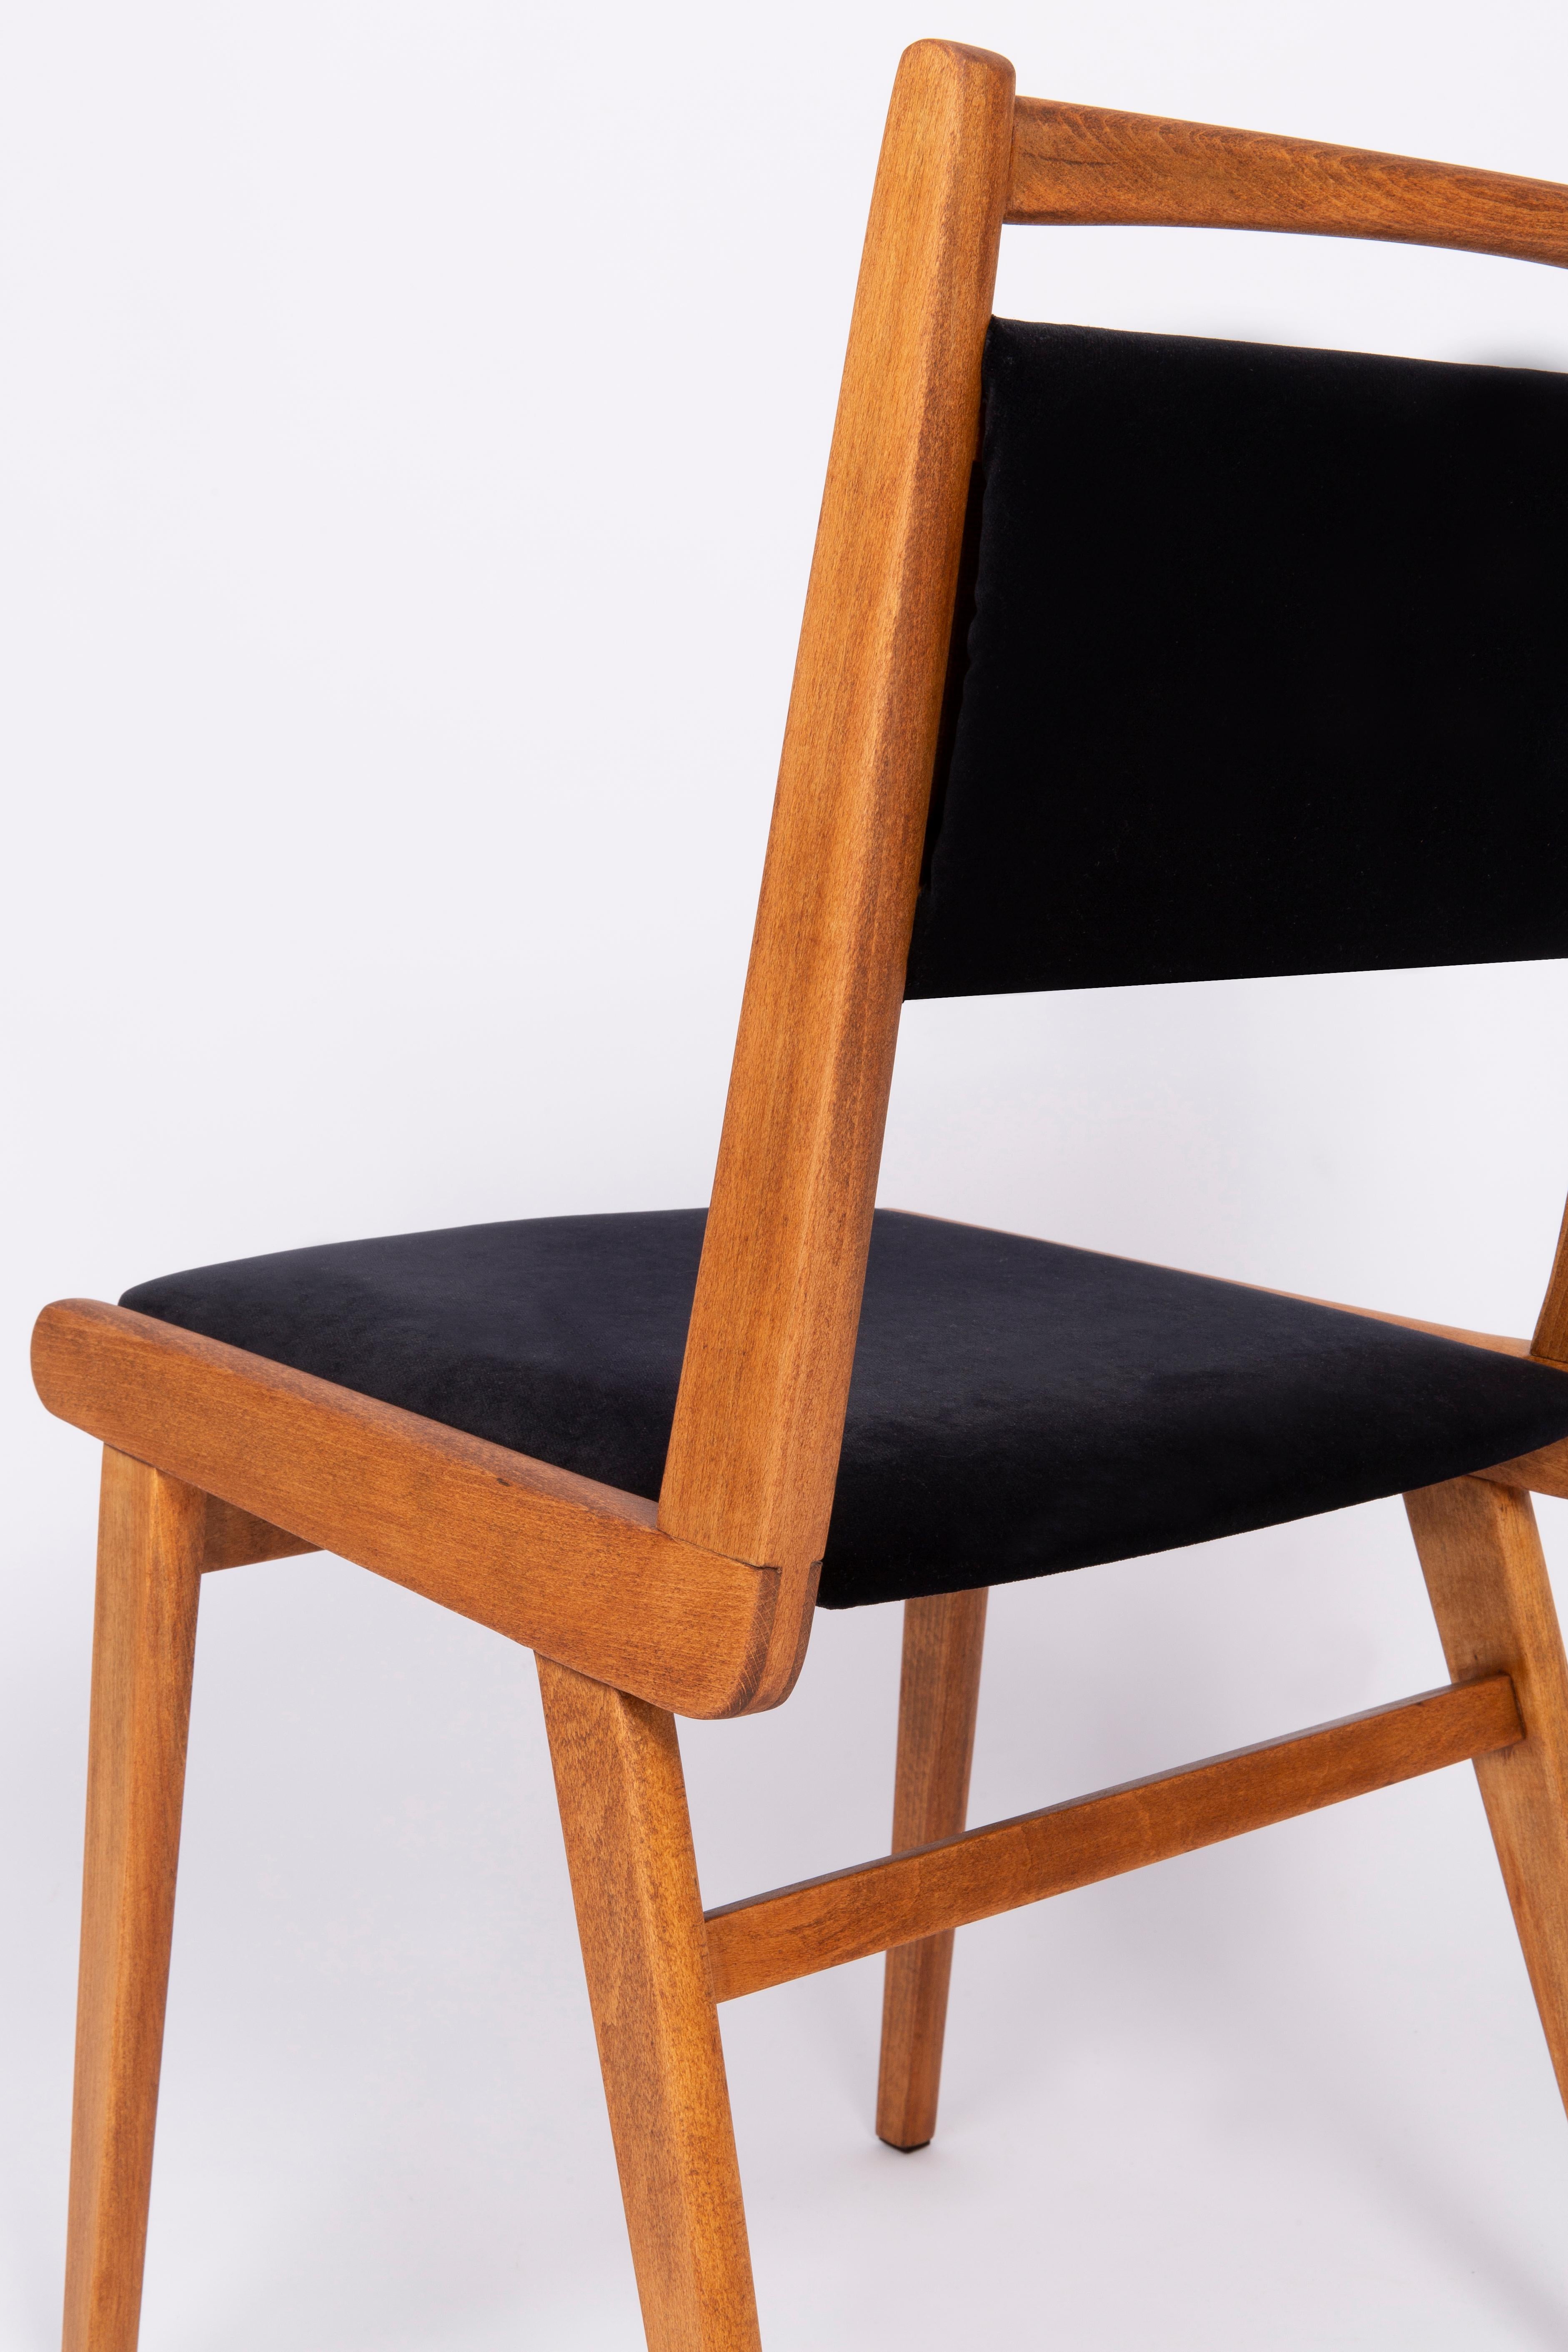 Hand-Crafted 20th Century Black Velvet Chair, Poland, 1960s For Sale